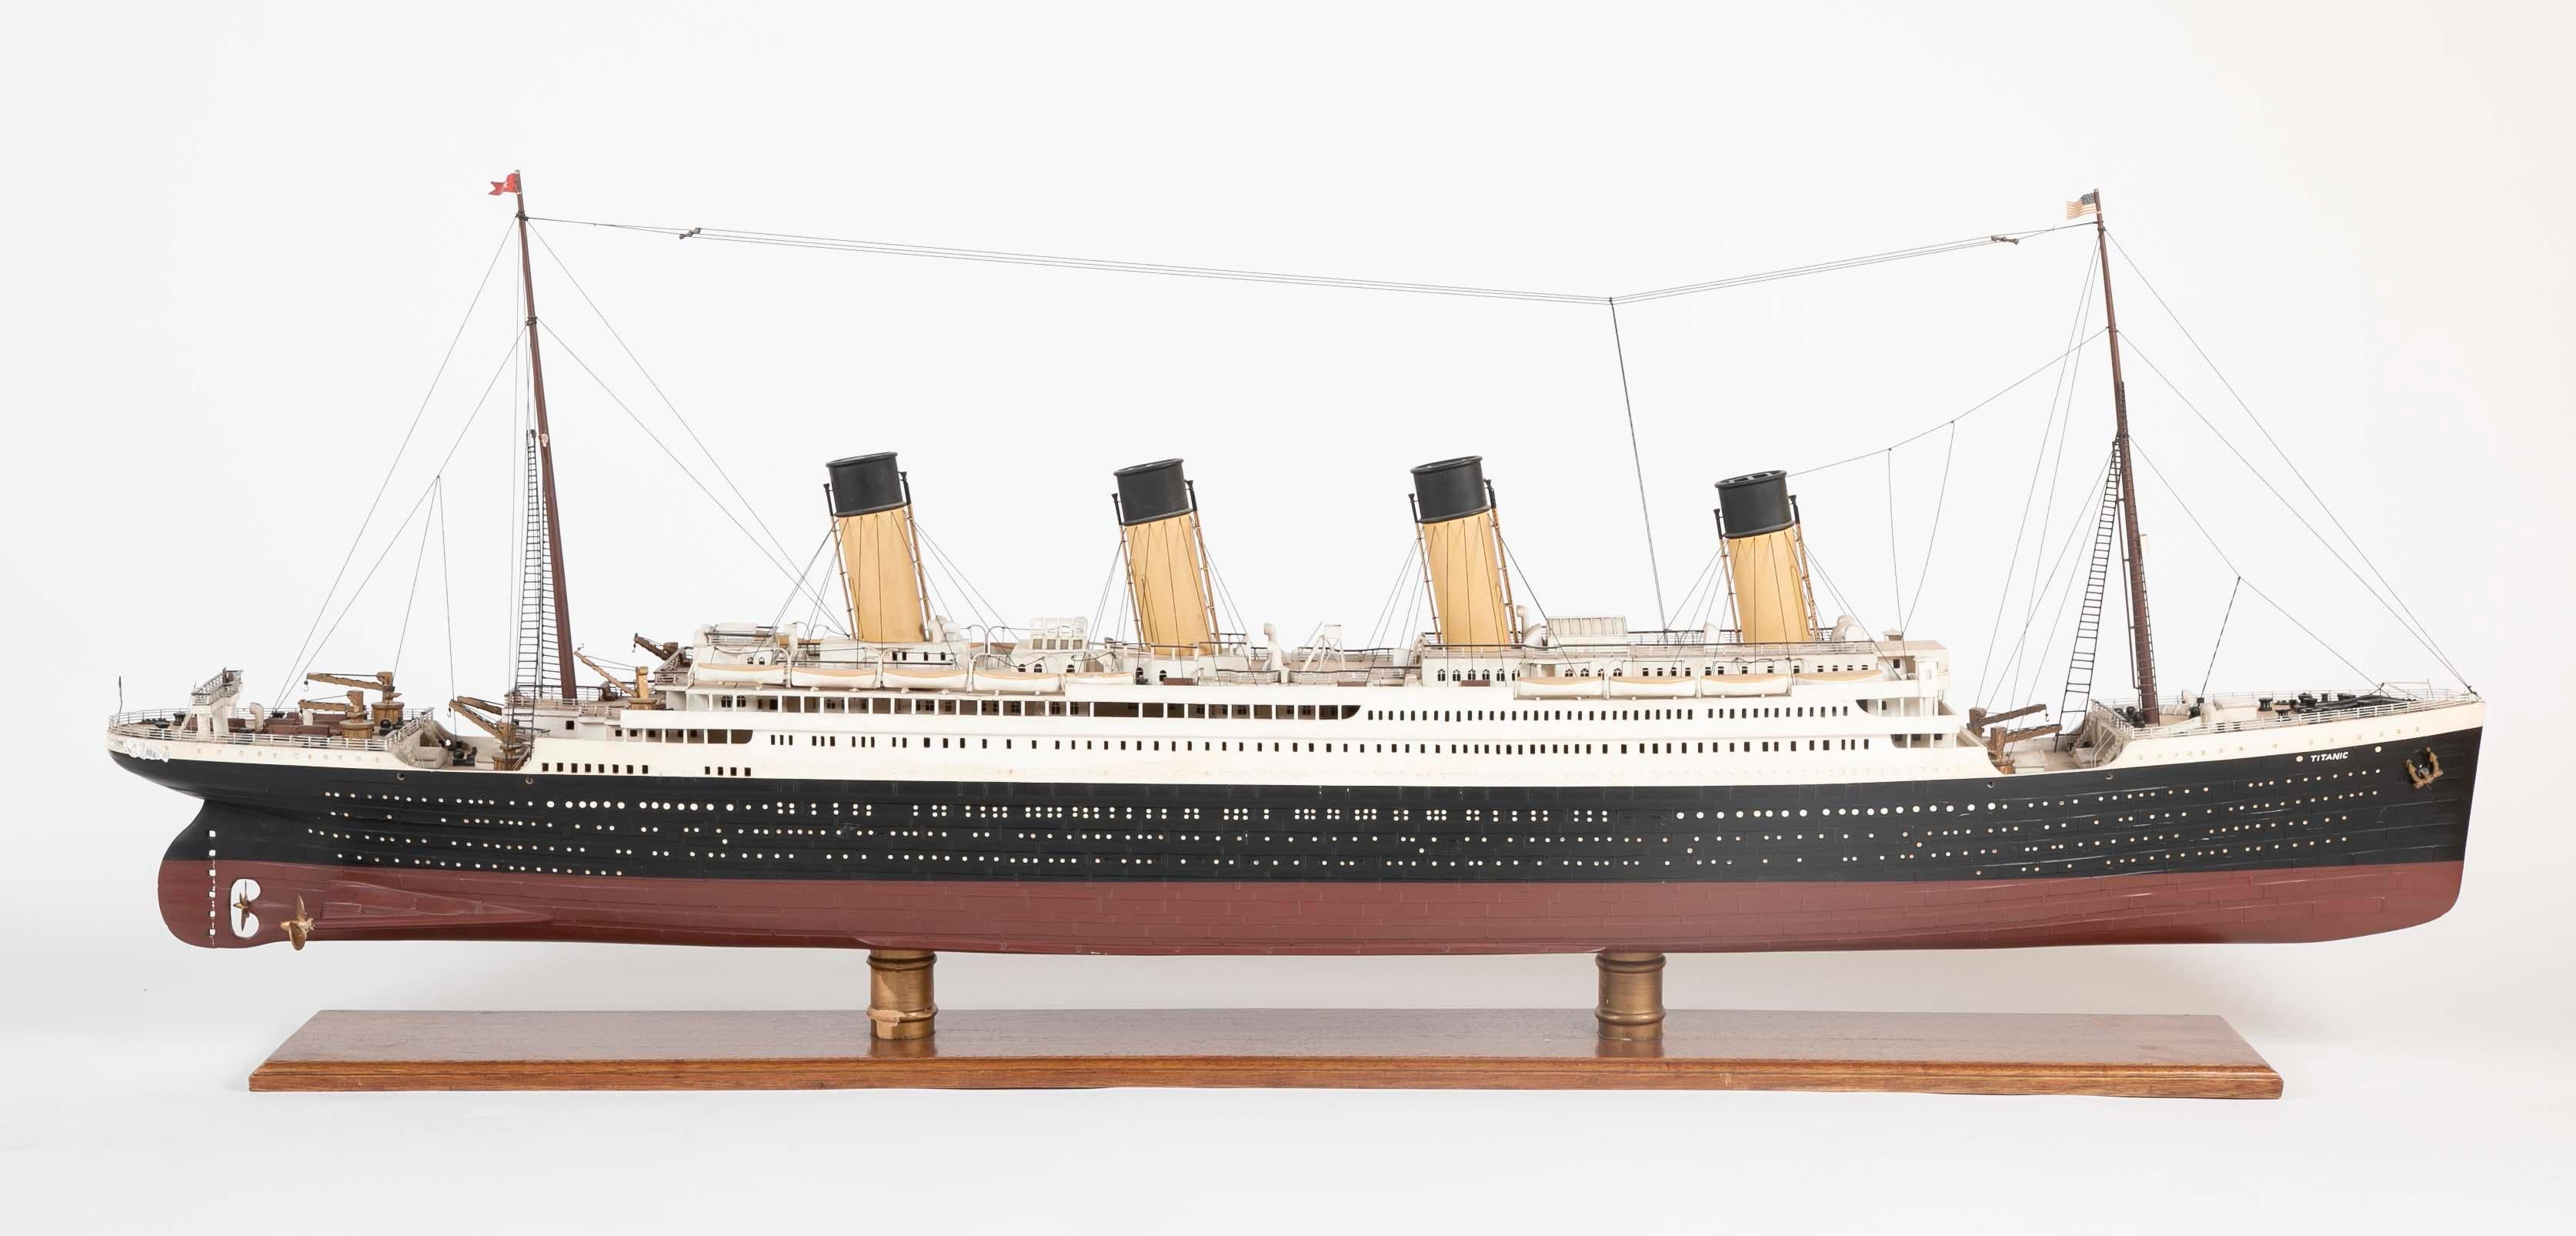 A well detailed large scale model of the famous ship. The hull is painted in a rust red bottom and black topside. The deck of the model is planked in basswood strips and fitted with numerous details which include masts and rigging. The deck details